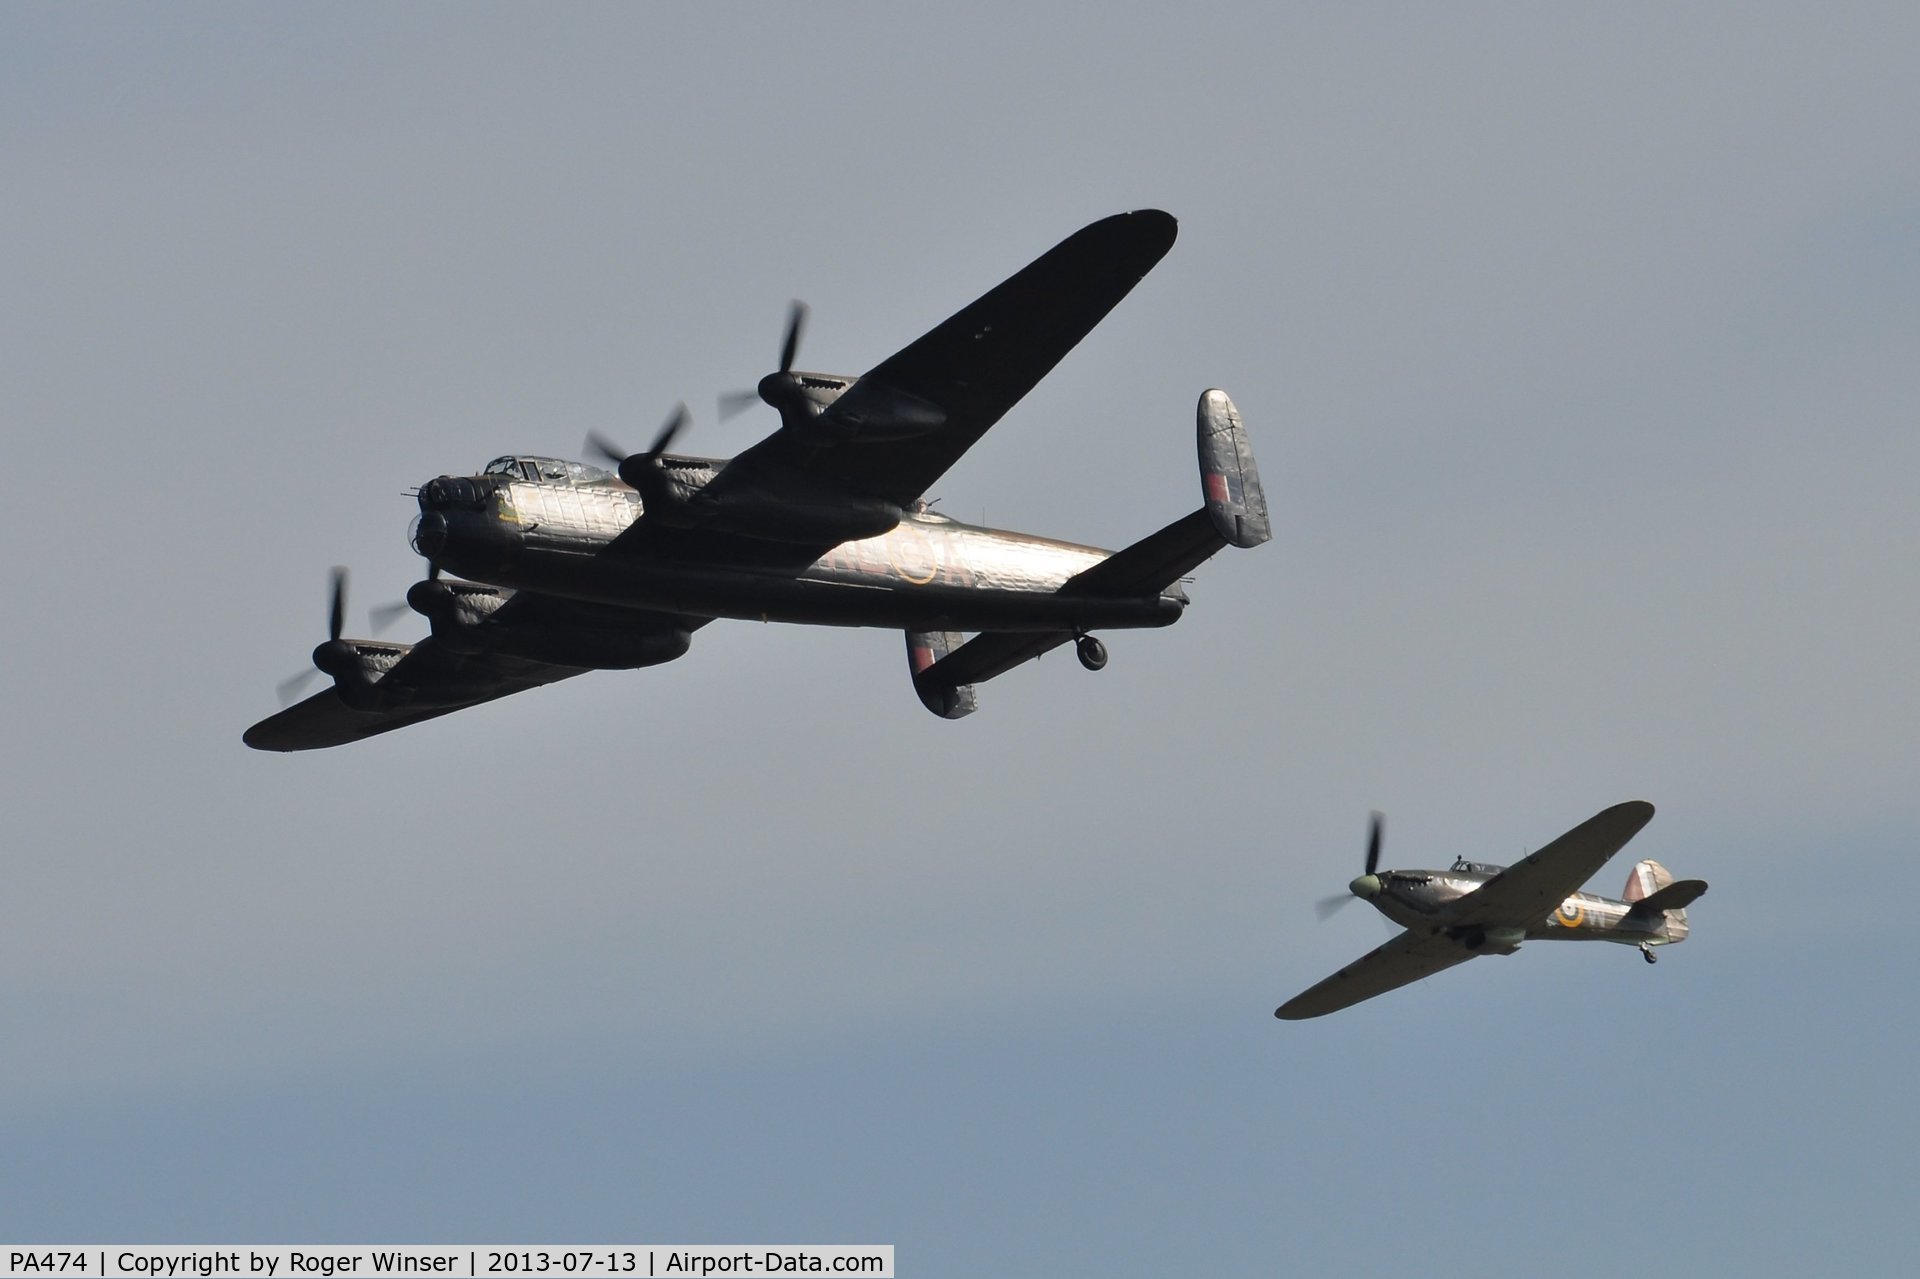 PA474, 1945 Avro 683 Lancaster B1 C/N VACH0052/D2973, Off airport. Five Merlins. BBMF Lancaster coded KC-A with little friend Hurricane IIc LF363 coded YB-W displaying on the first day of the Wales National Air Show, Swansea Bay, Wales, UK.